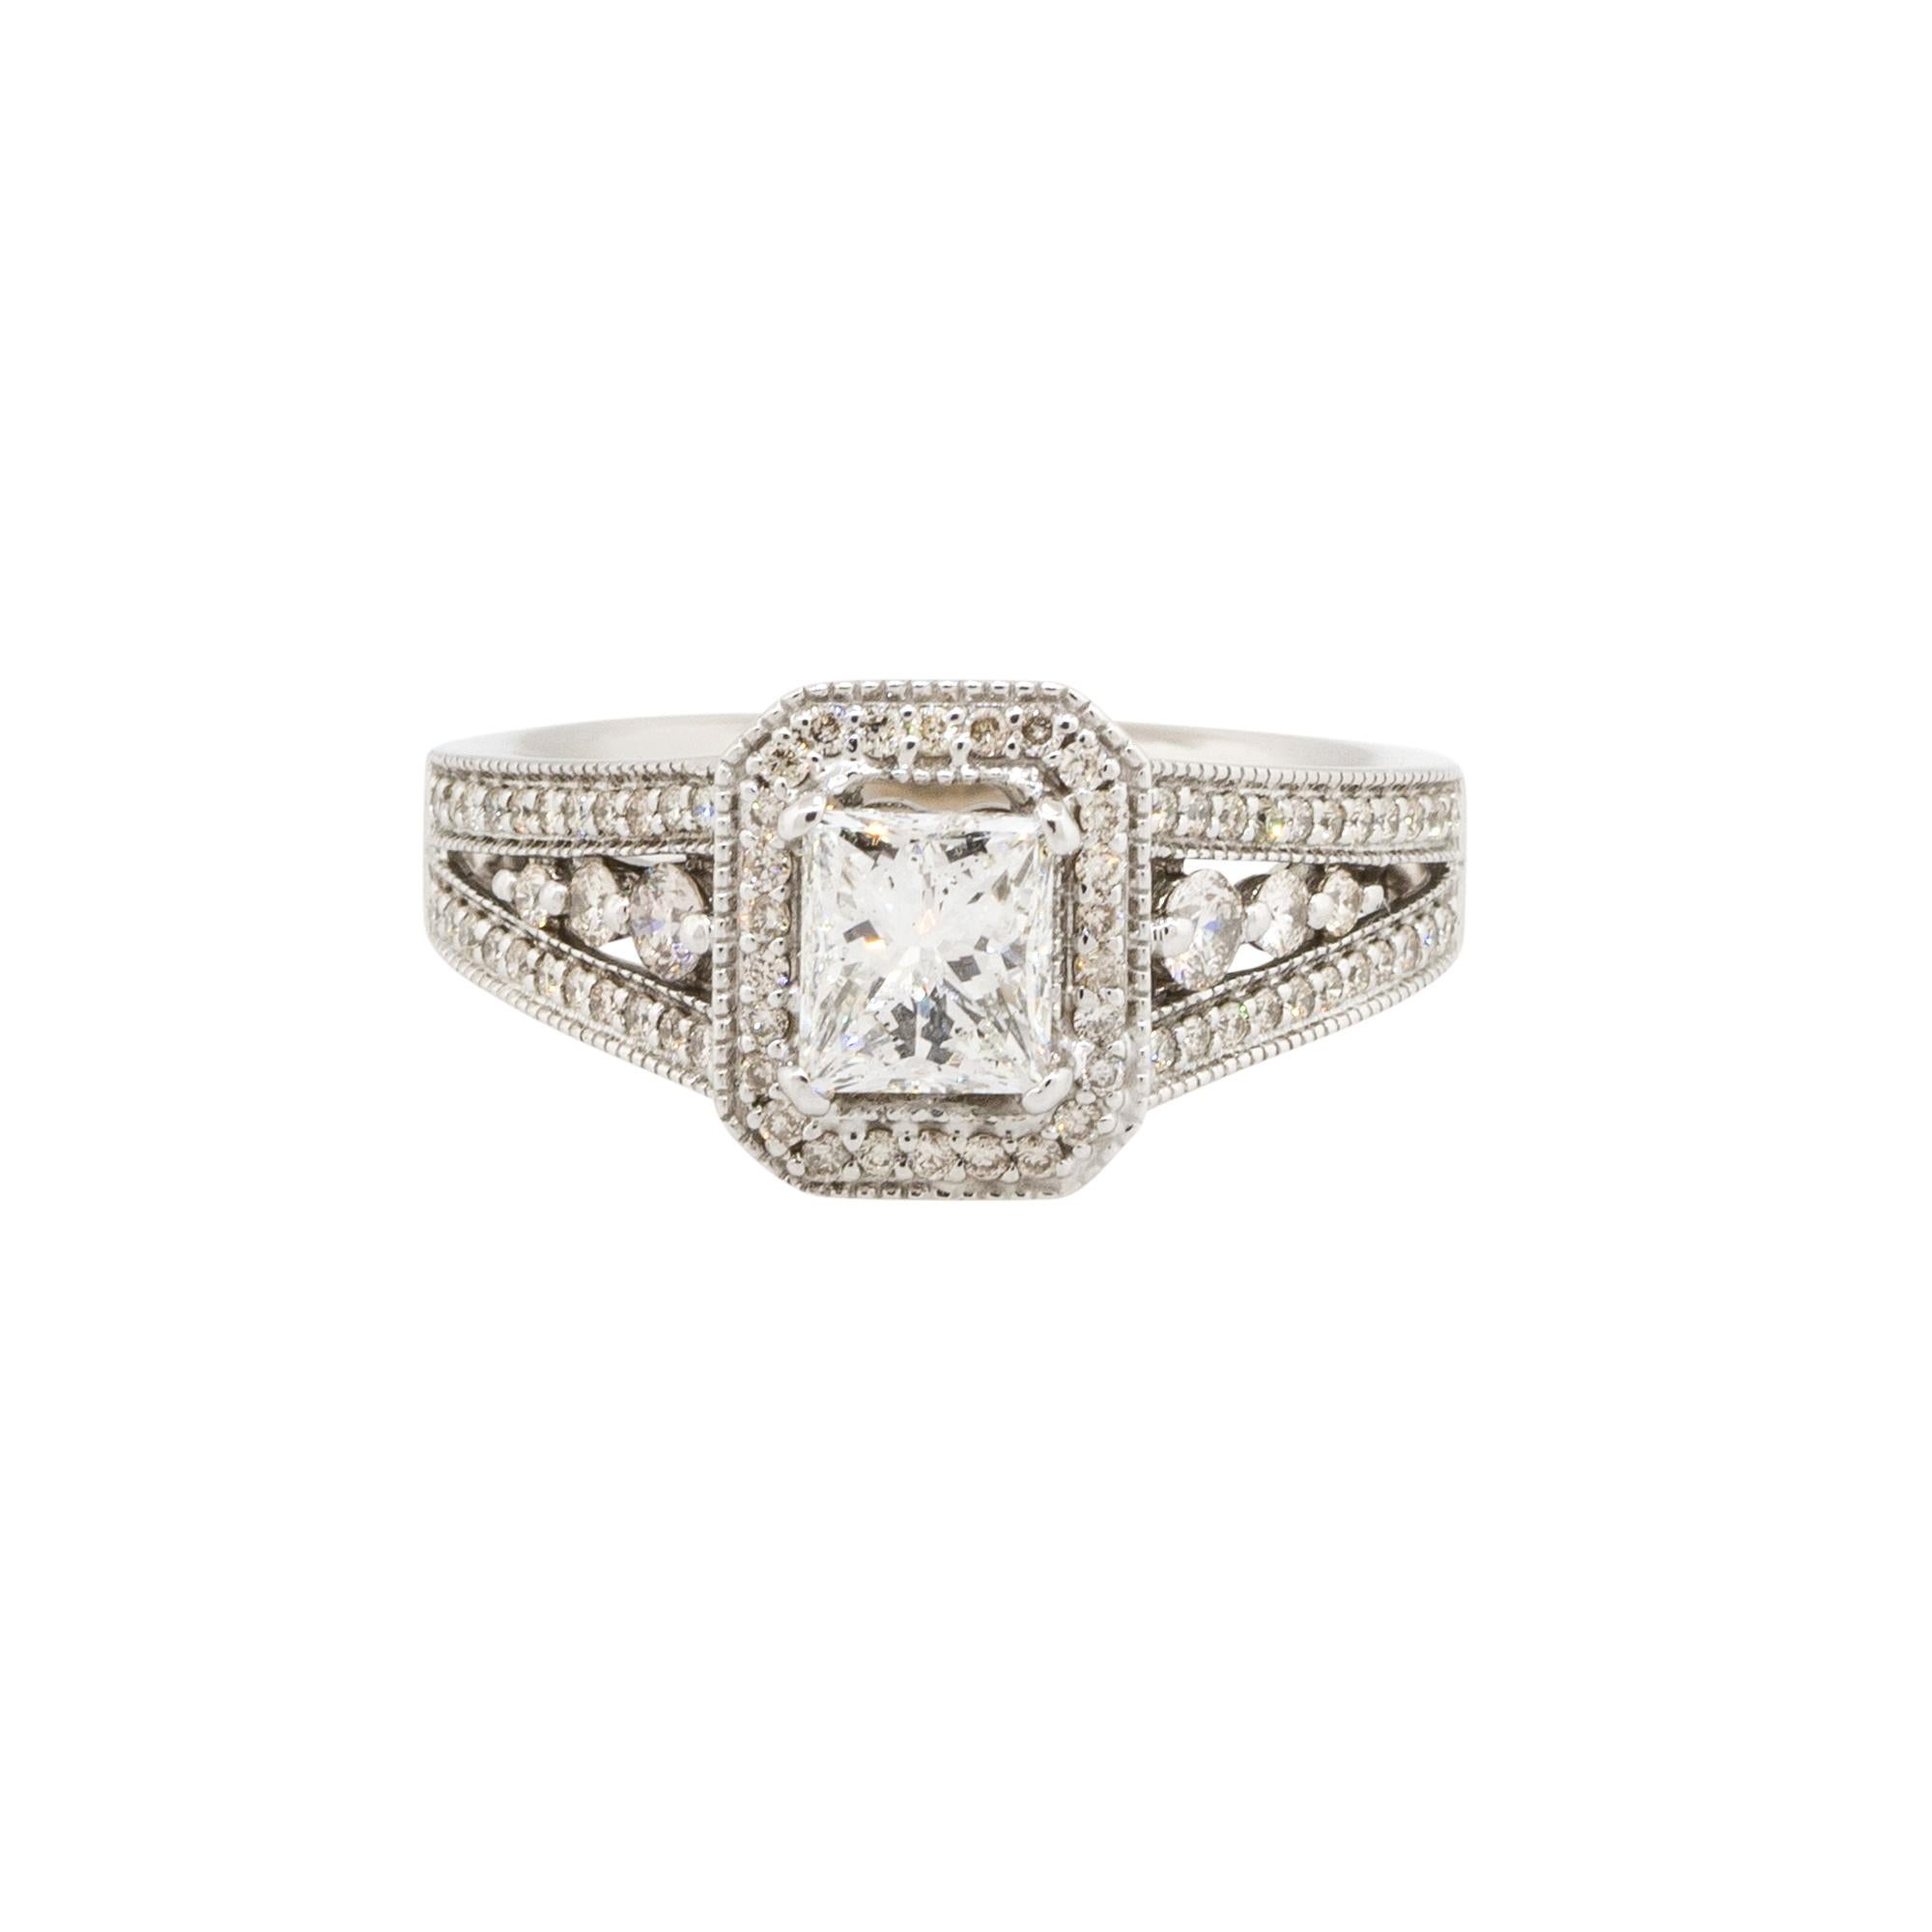 Material: 14k White Gold
Center Diamond Details: Approx. 1.00ctw princess cut Diamond. Diamond is I in color and I1 in clarity
Adjacent Diamond Details: Approx. 0.50ctw of round cut Diamonds. Diamonds are G/H in color and VS in clarity
Total weight: